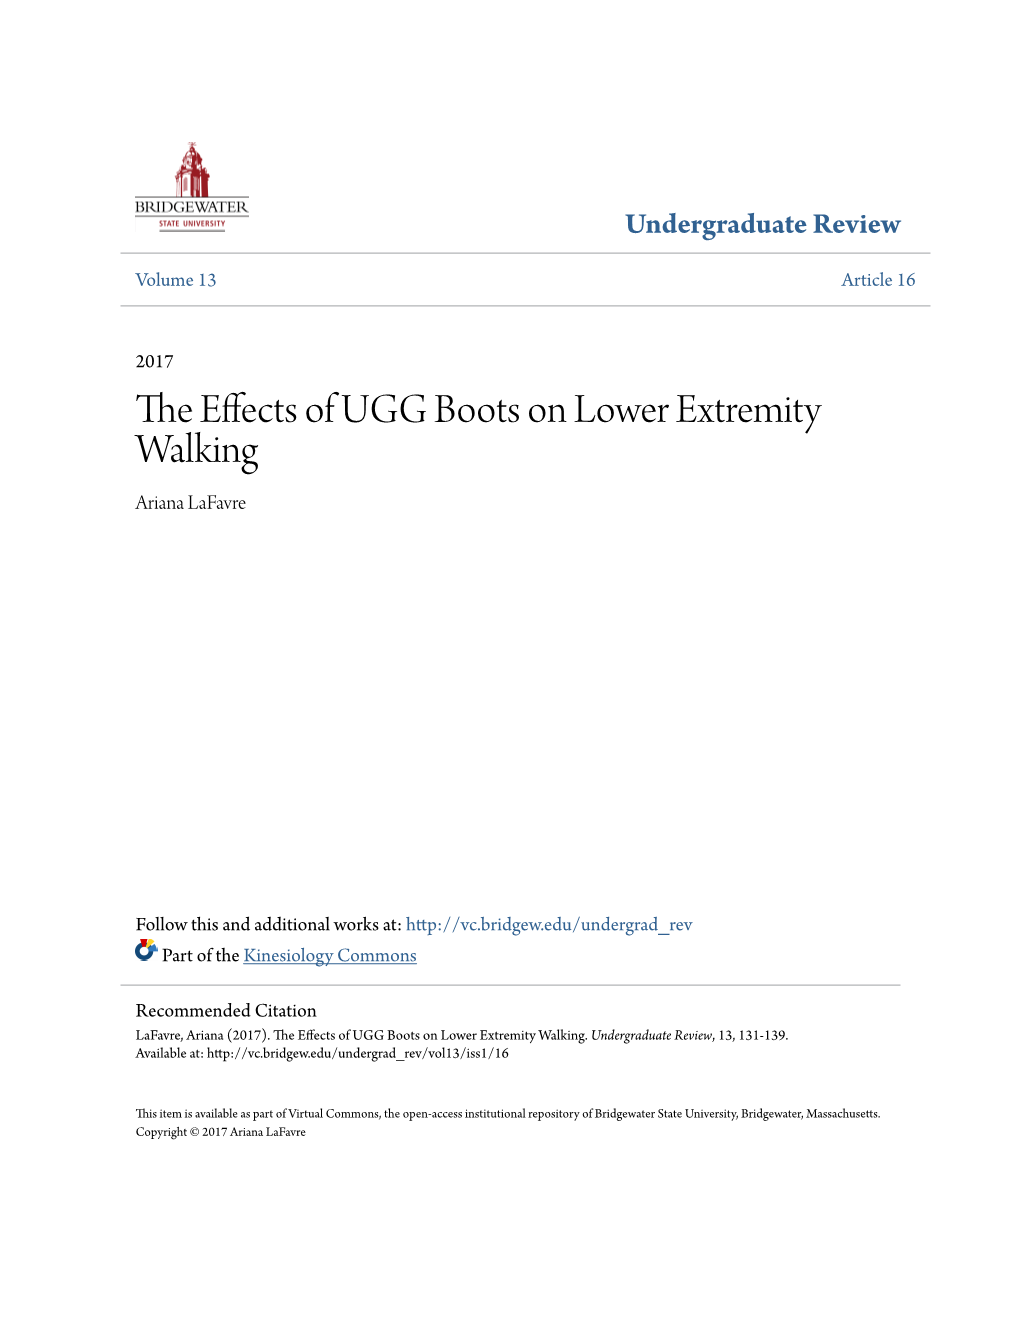 The Effects of UGG Boots on Lower Extremity Walking